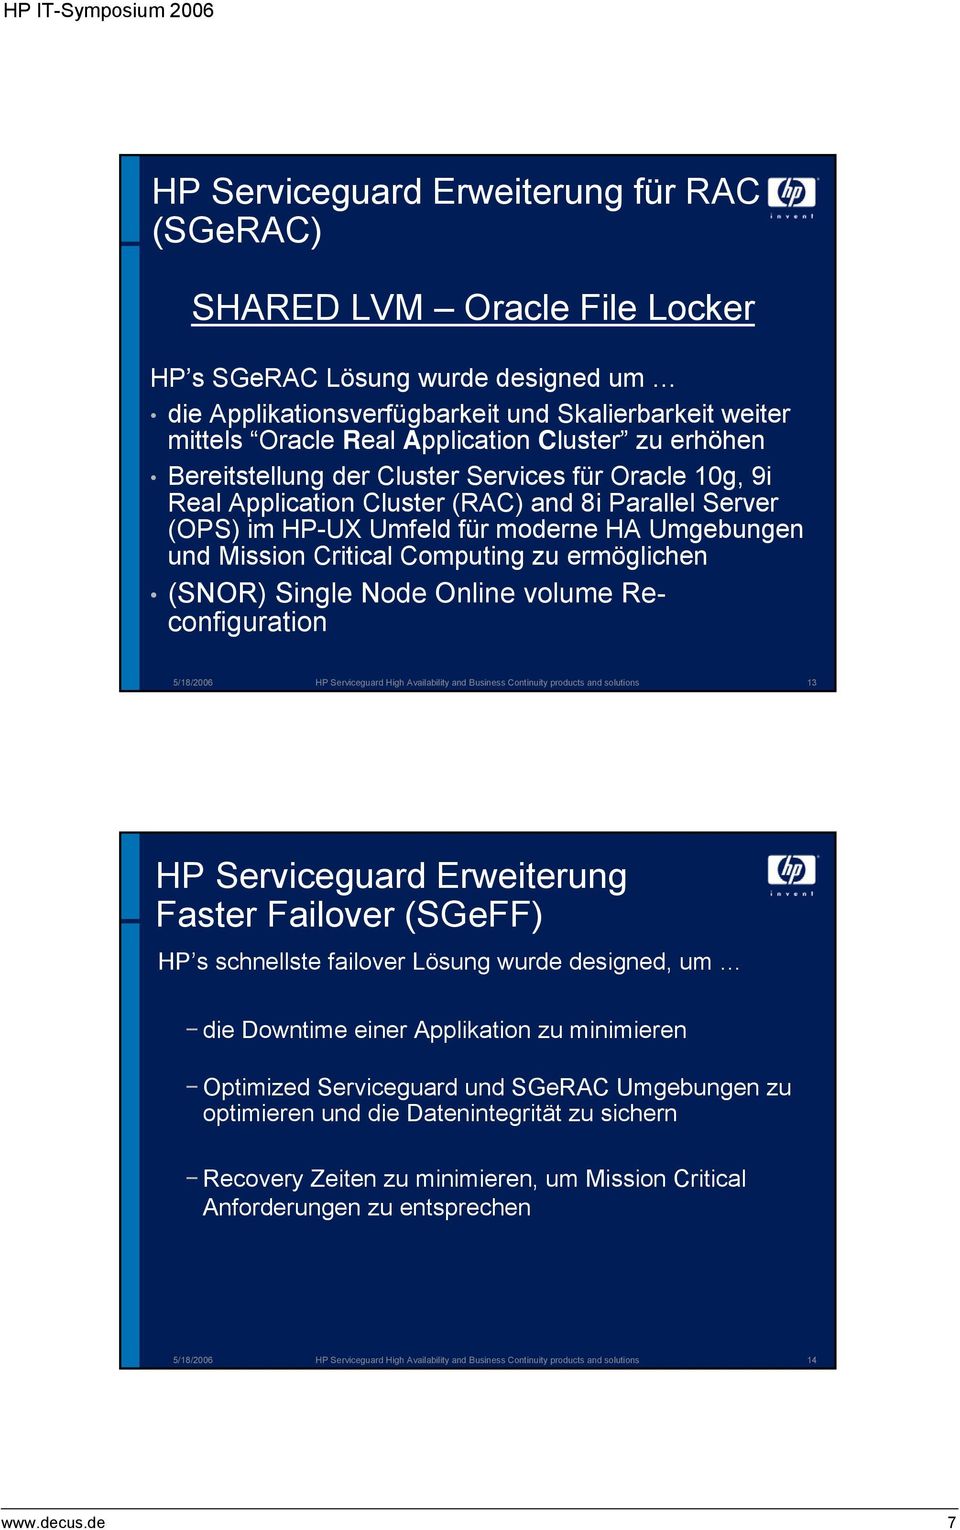 Computing zu ermöglichen (SNOR) Single Node Online volume Reconfiguration 5/18/2006 HP Serviceguard High Availability and Business Continuity products and solutions 13 HP Serviceguard Erweiterung